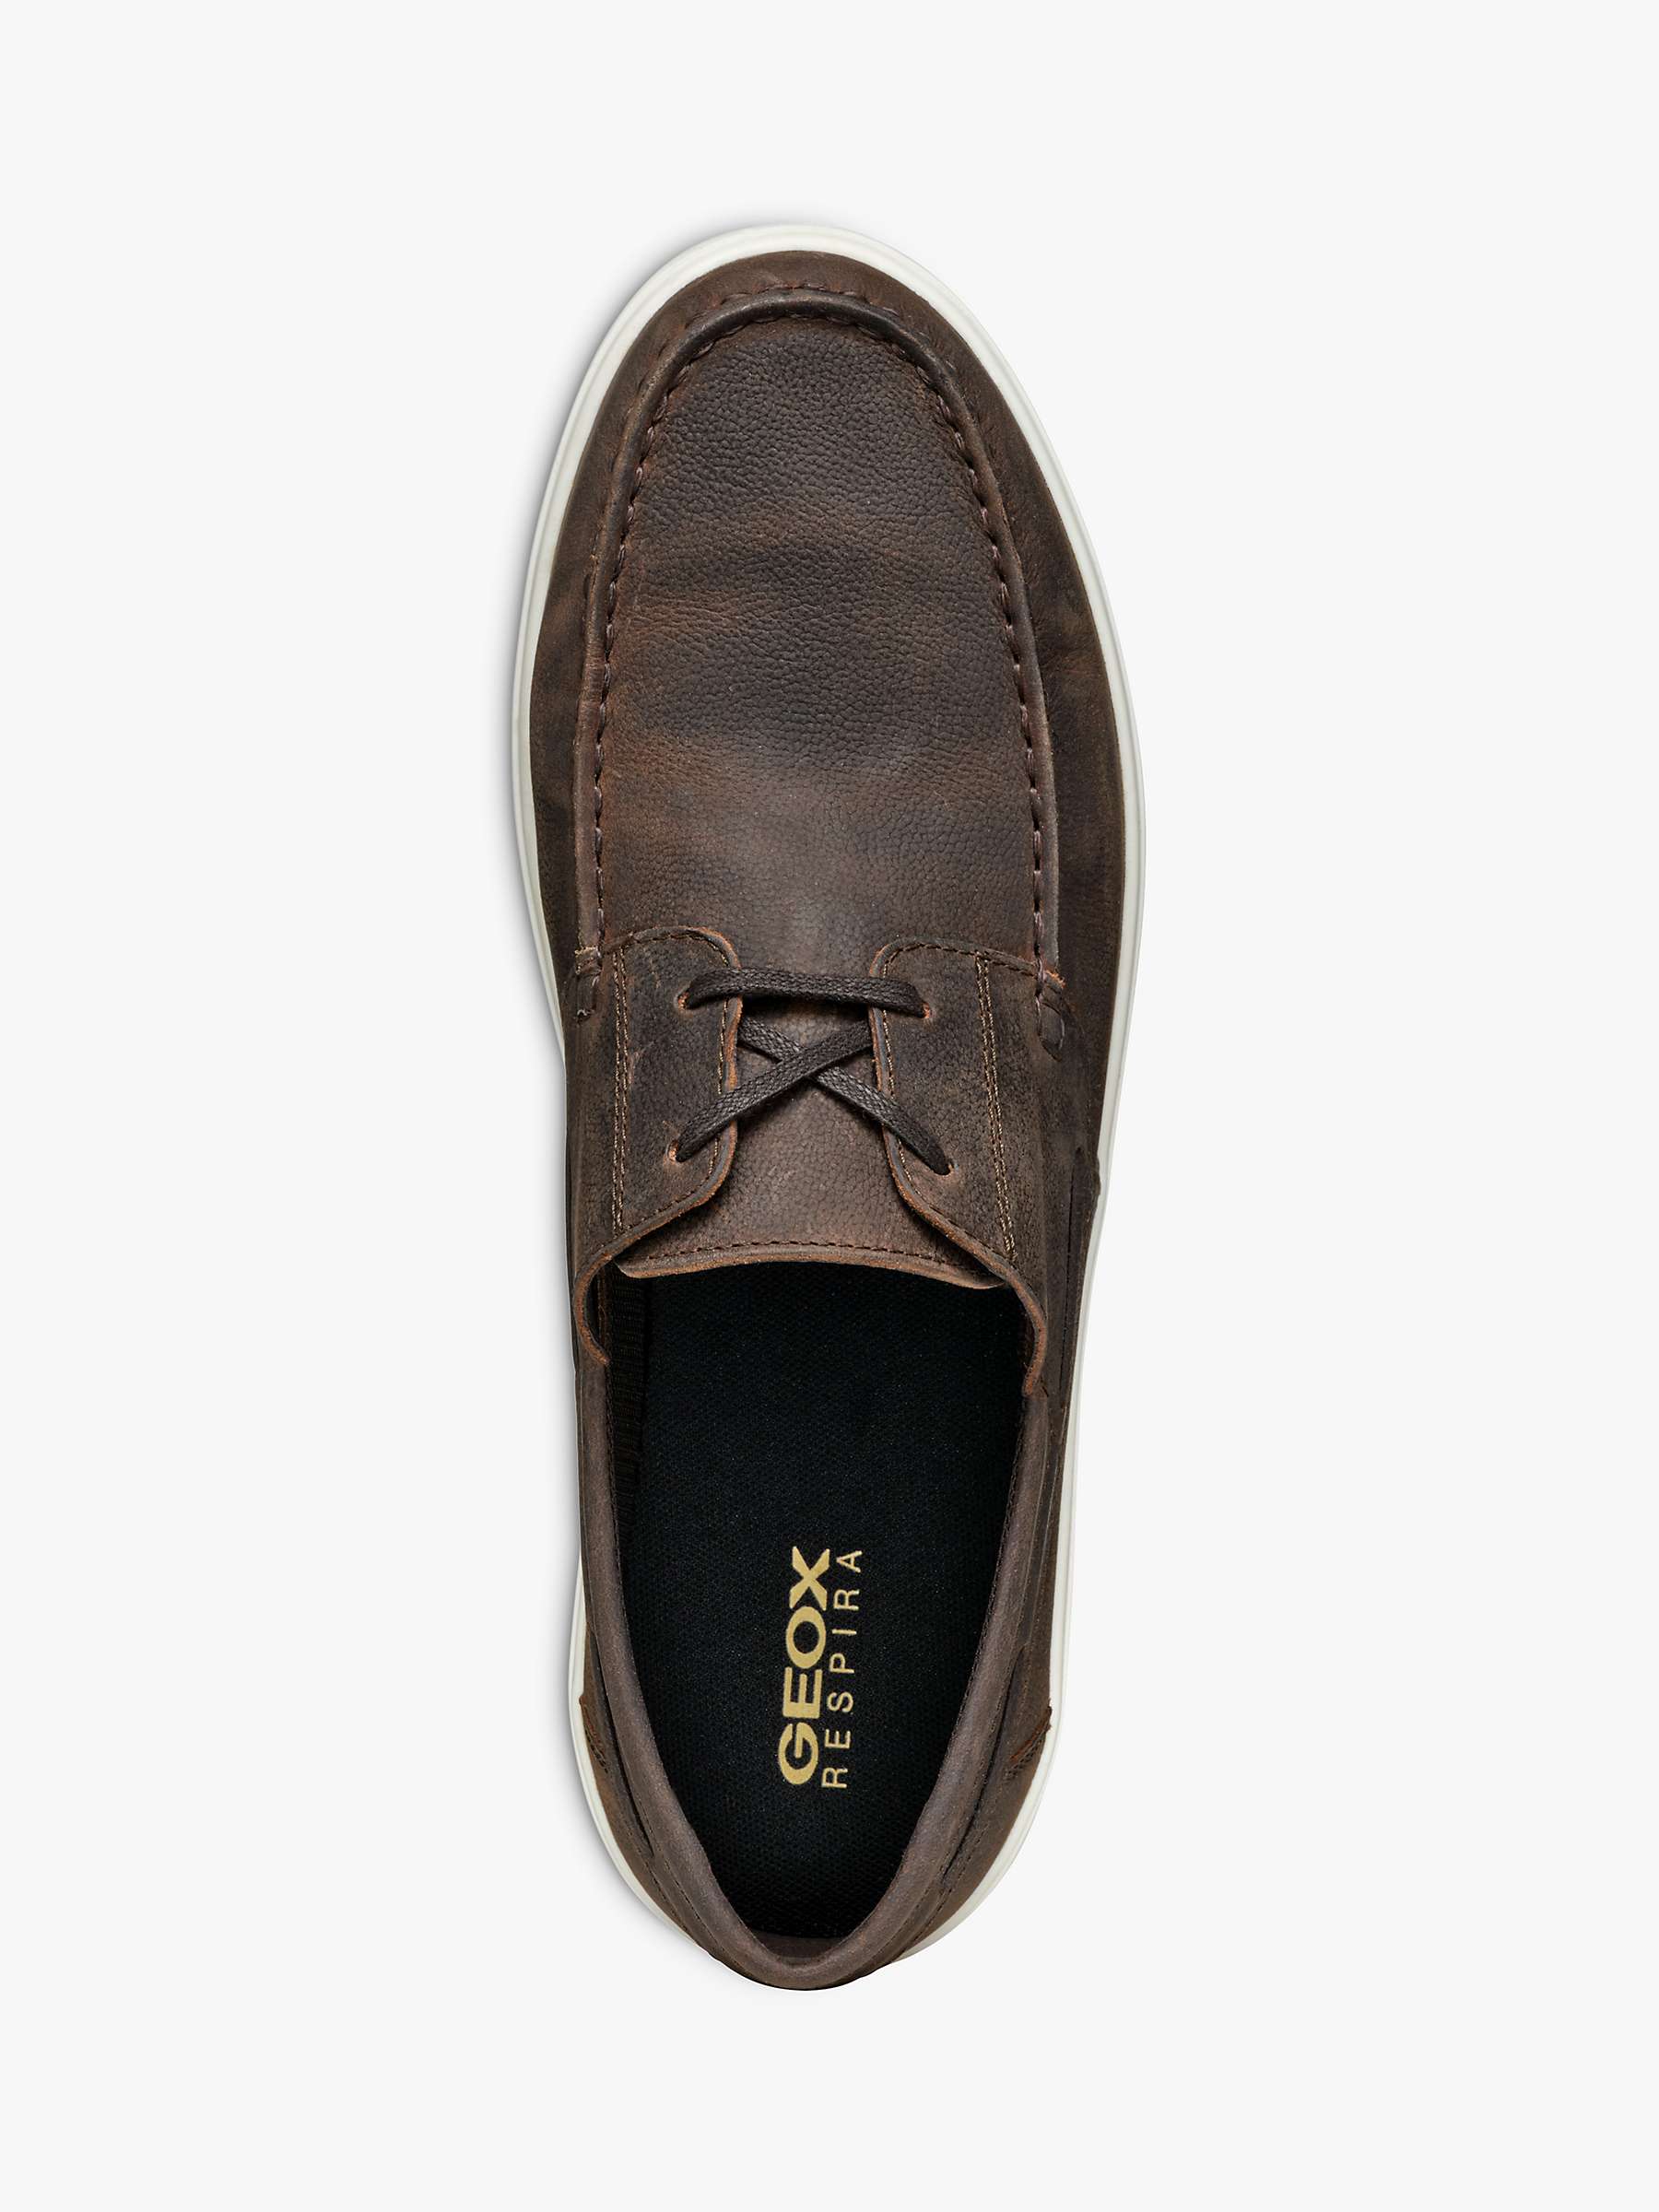 Buy Geox Avola Leather Loafers, Light Brown Online at johnlewis.com